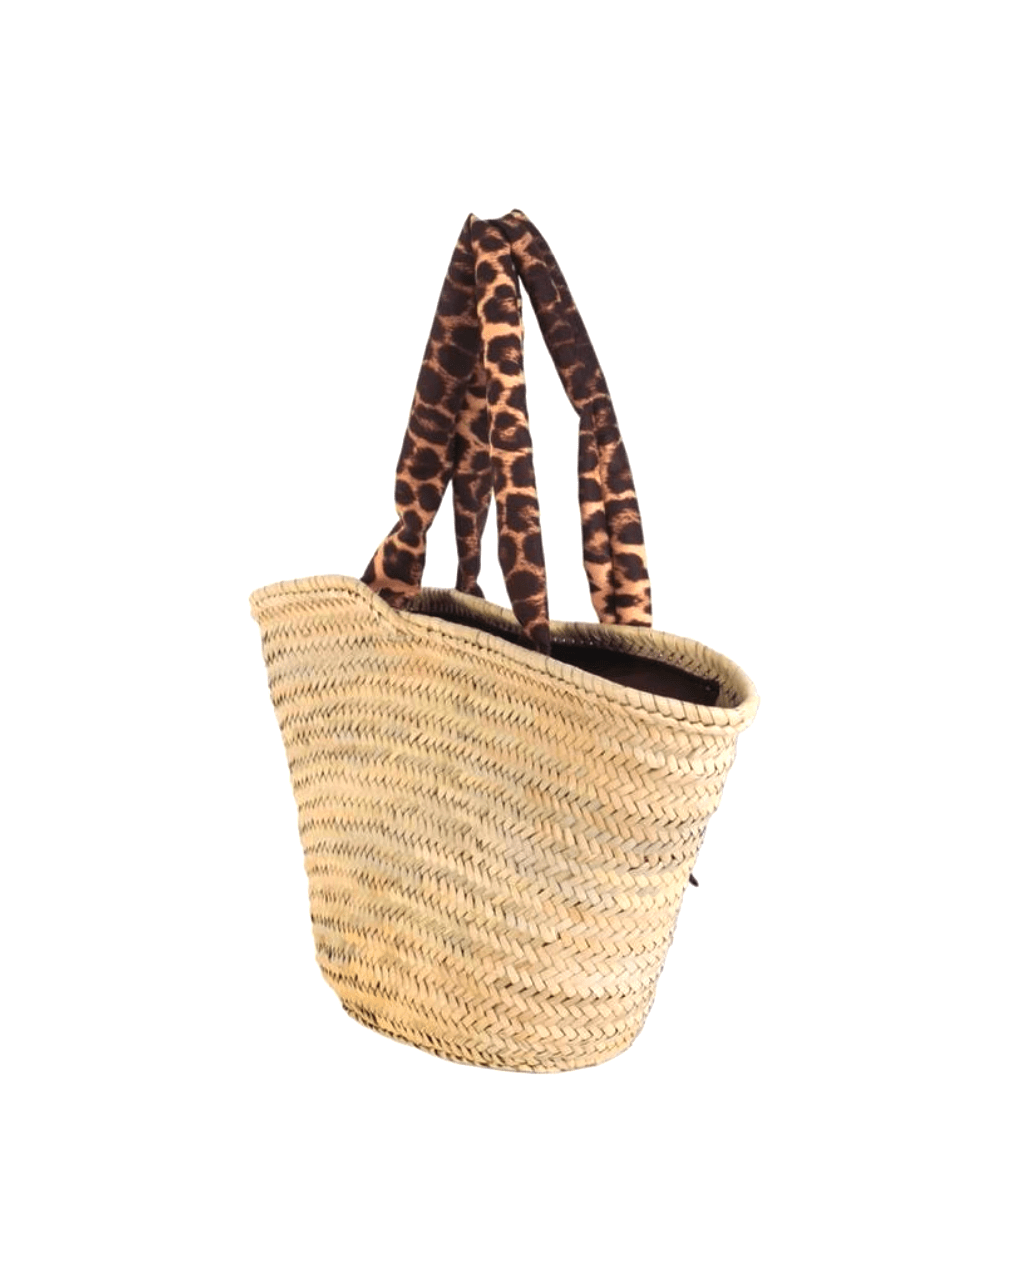 Leopard Print Palm and Canvas Tote Bag big - Peggell